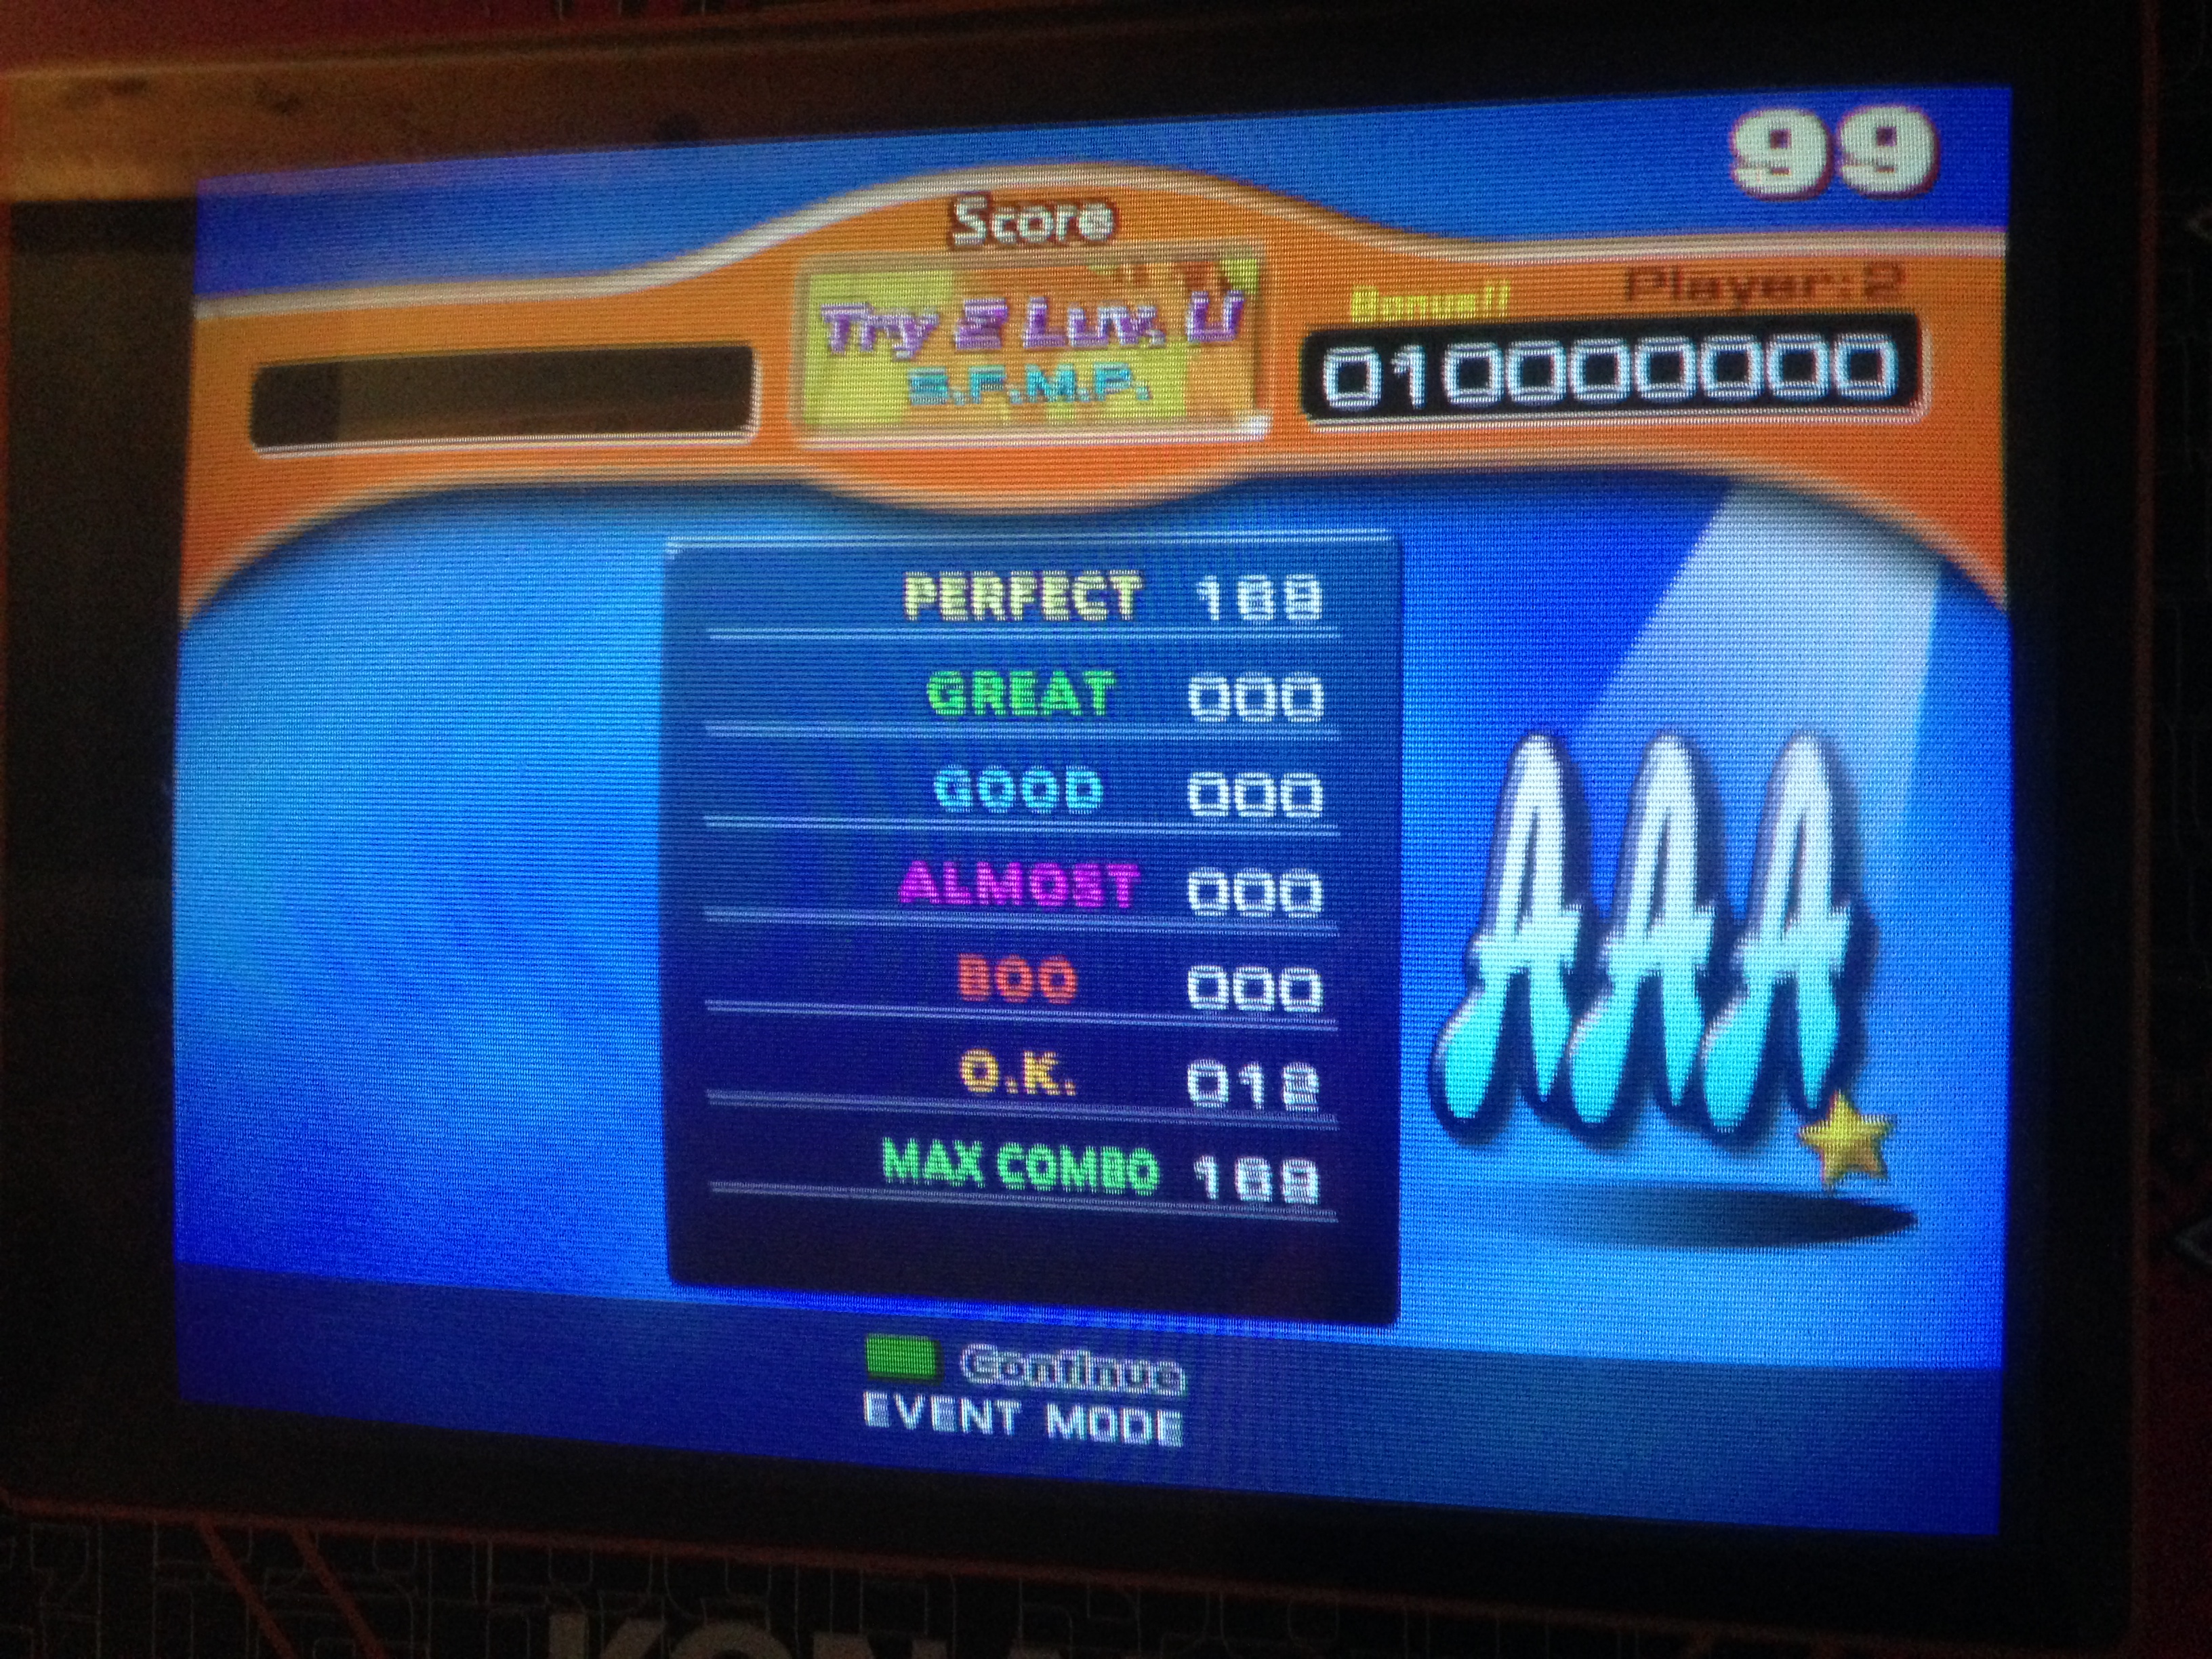 Doubles AAA#14 - Try 2 Luv U